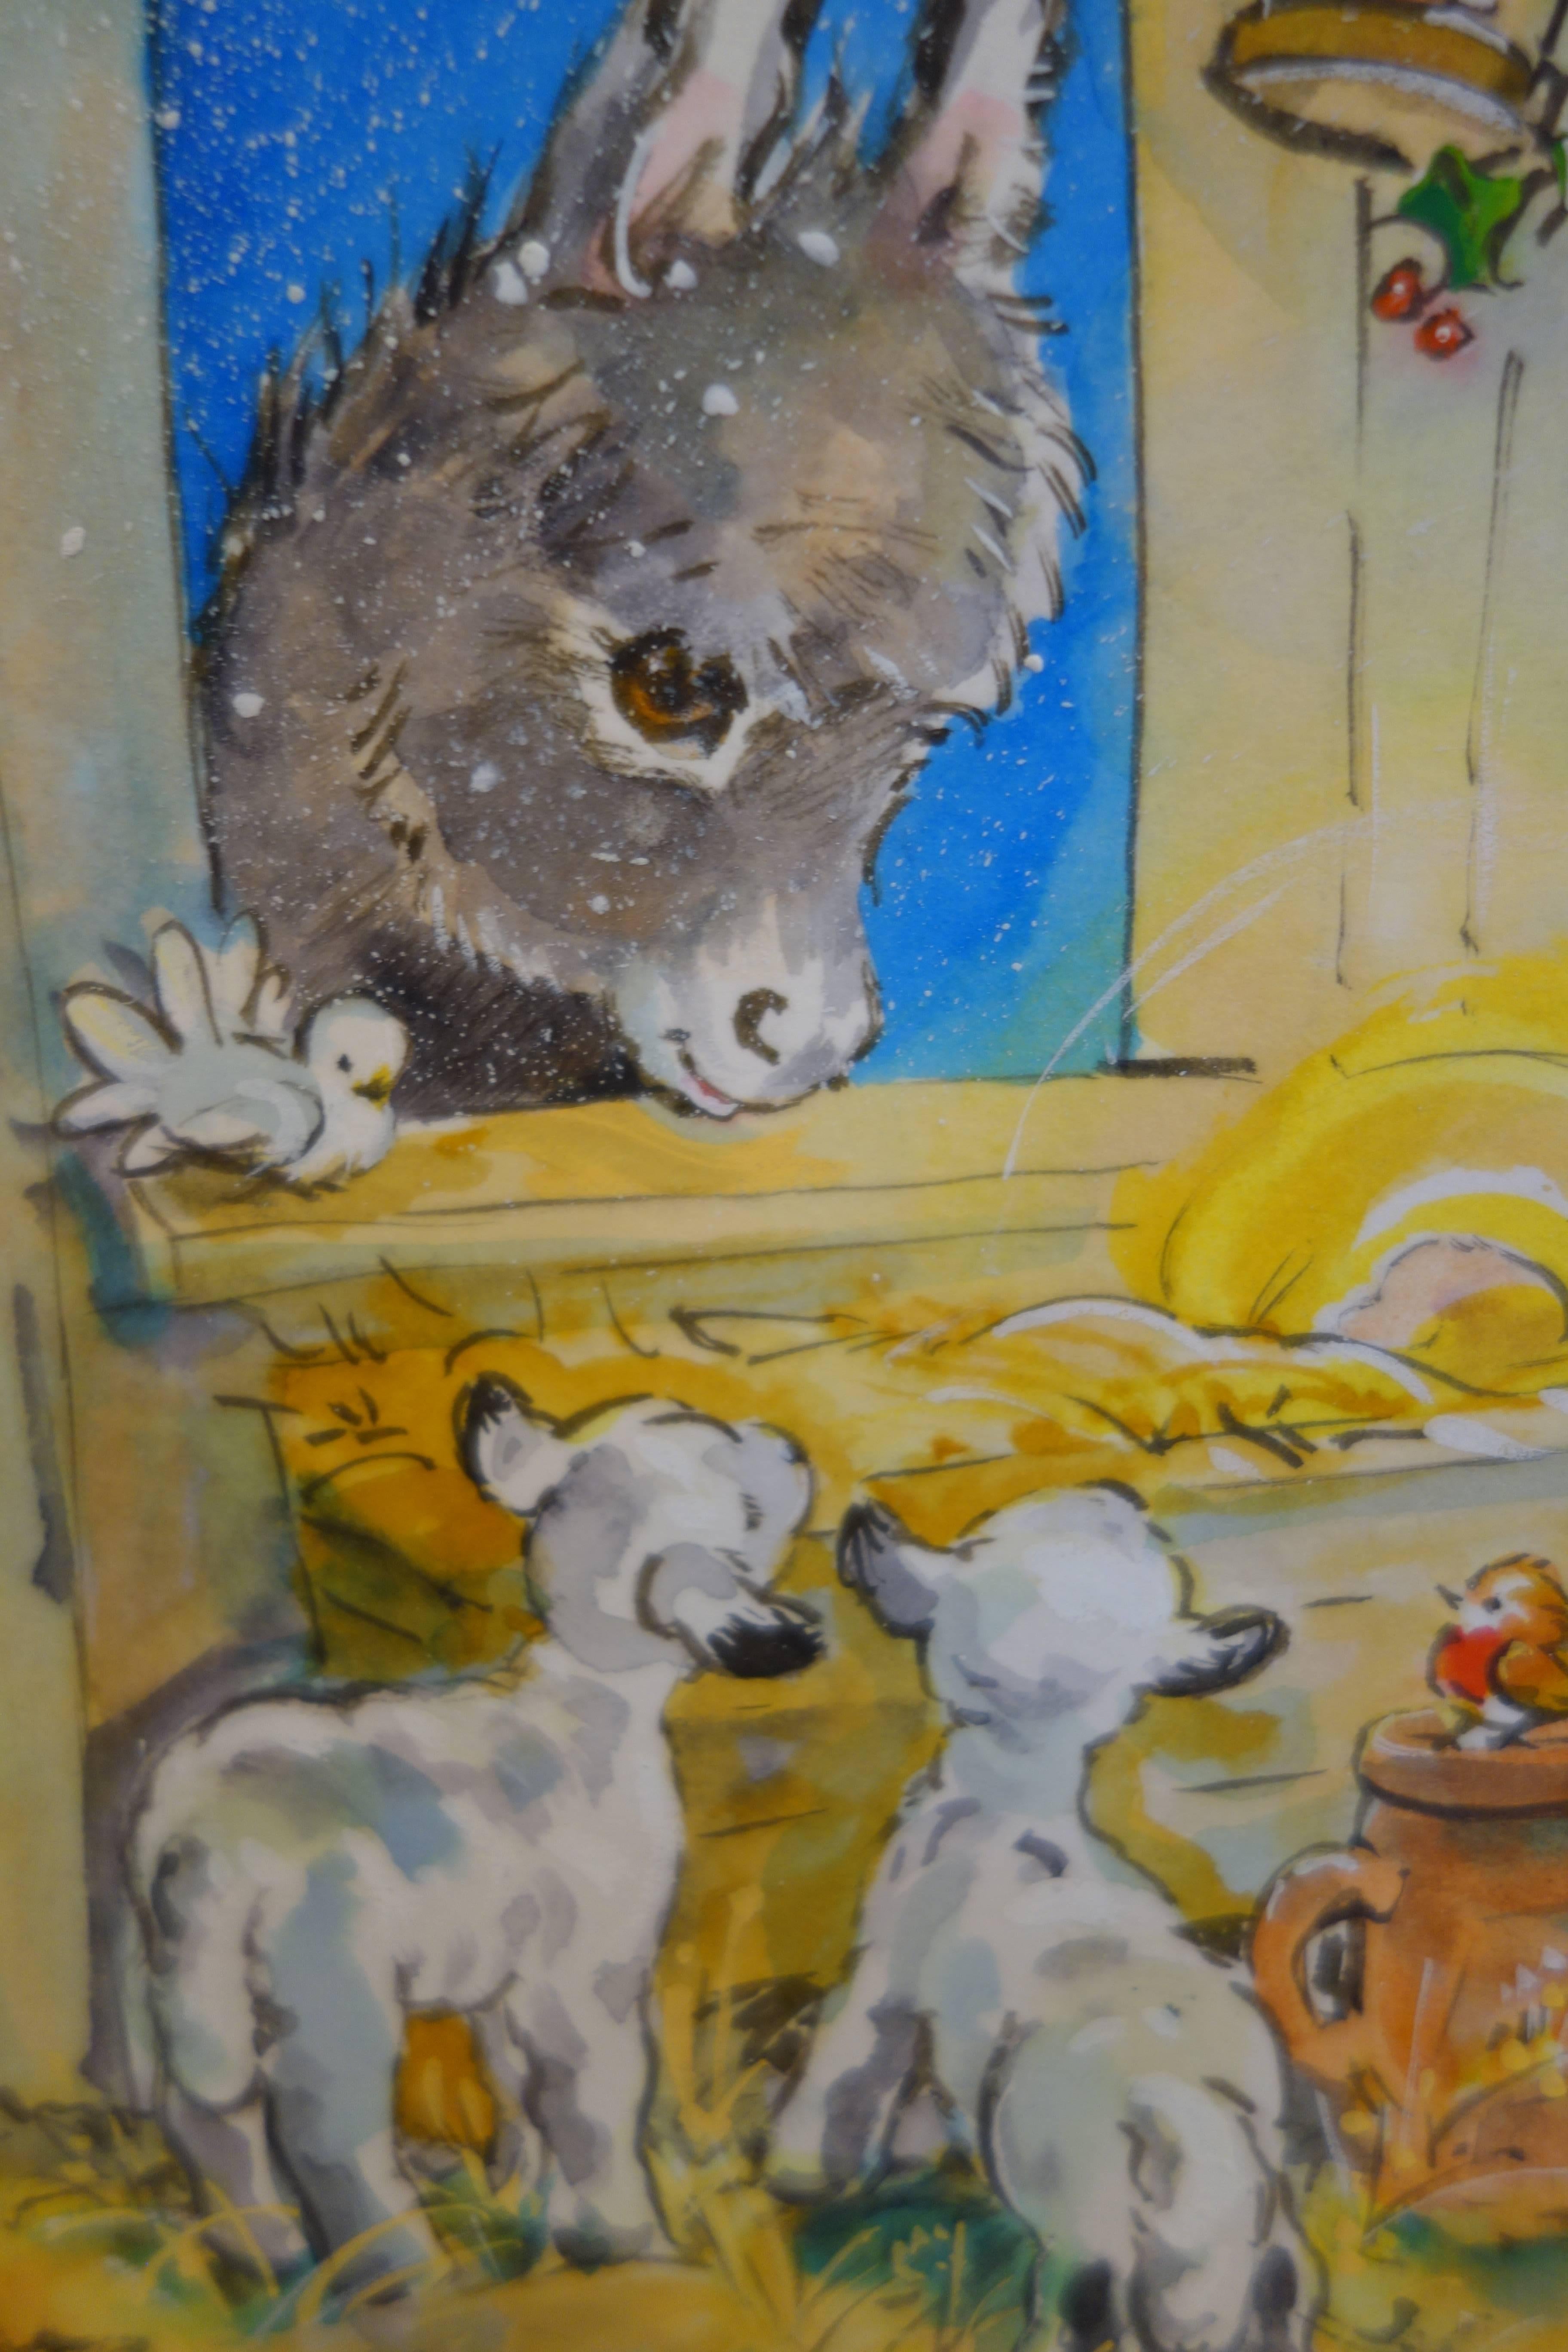 Christmas night with Donkeys, a Robin and Lambs in a stable by a crib - Art by Diana Matthes